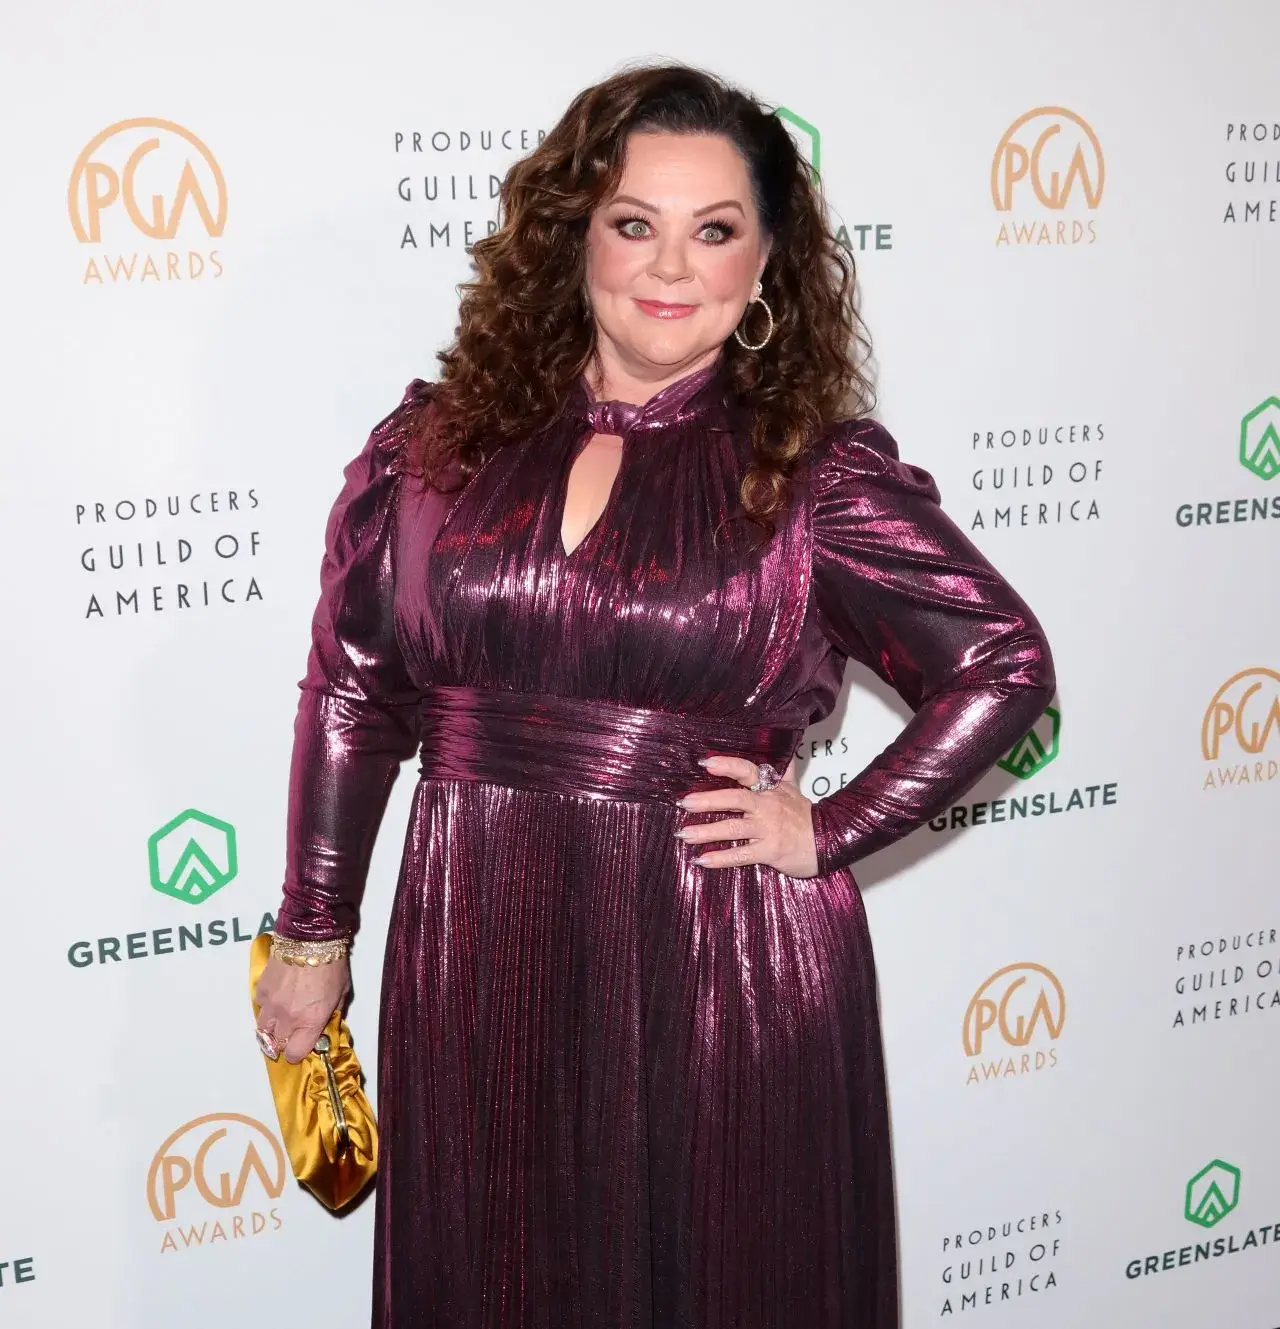 MELISSA MCCARTHY PHOTOSHOOT AT PRODUCERS GUILD AWARDS IN LOS ANGELES 3